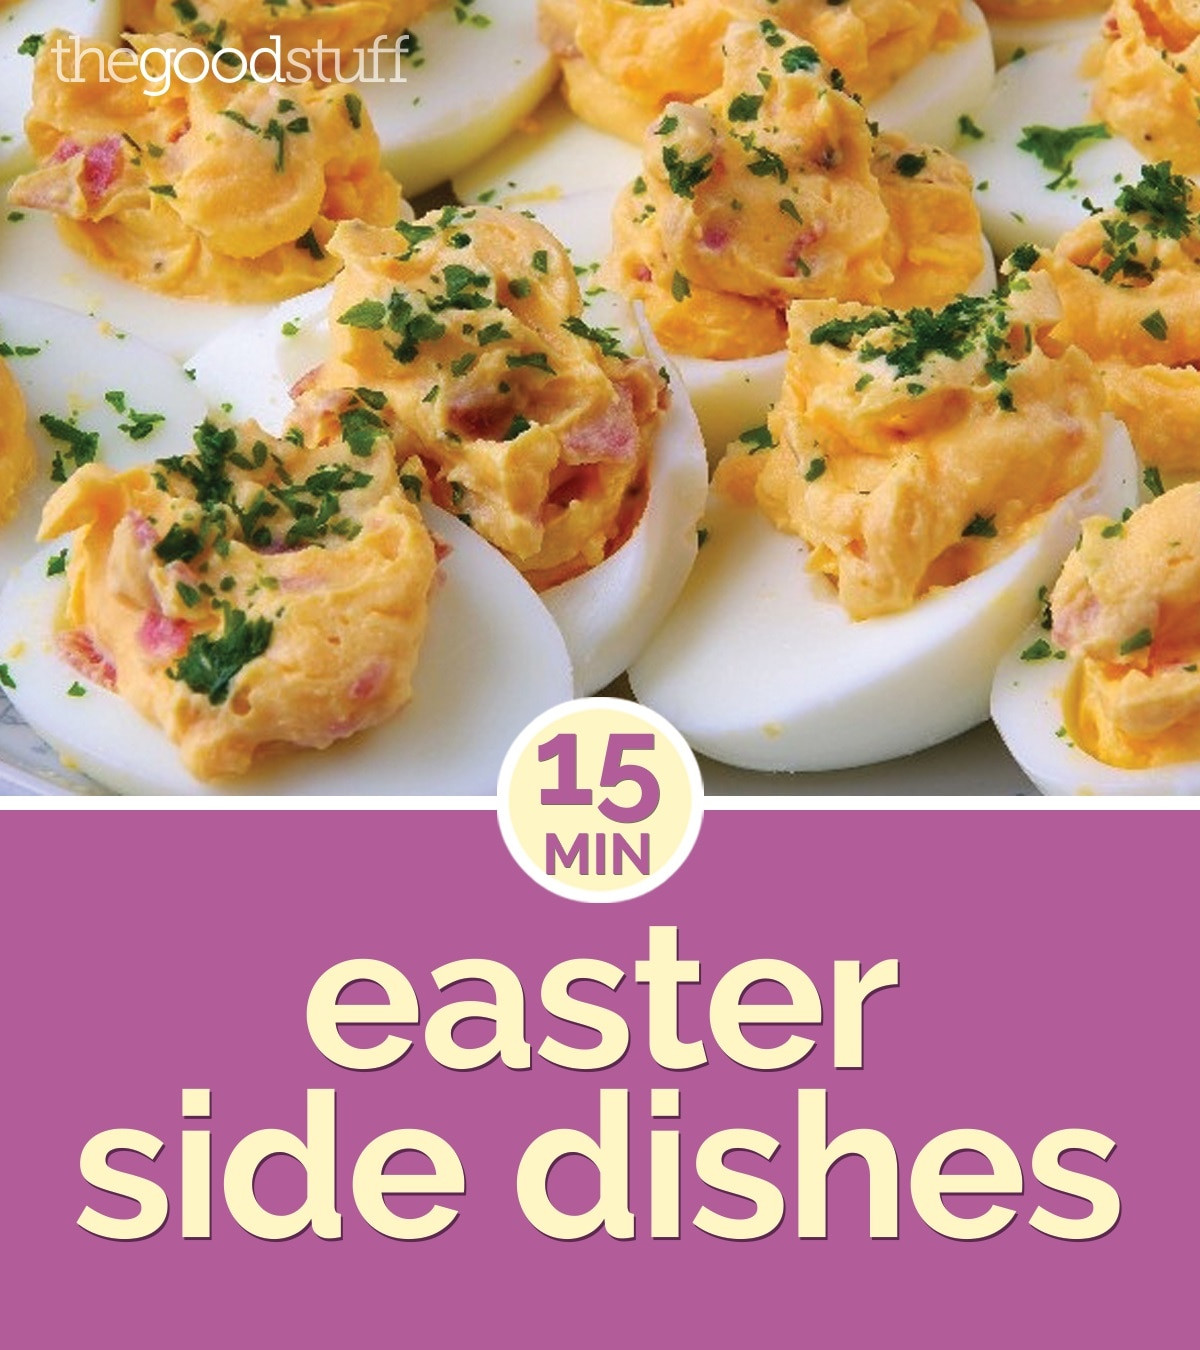 Traditional Easter Dinner Sides
 15 Minute Easter Side Dishes thegoodstuff